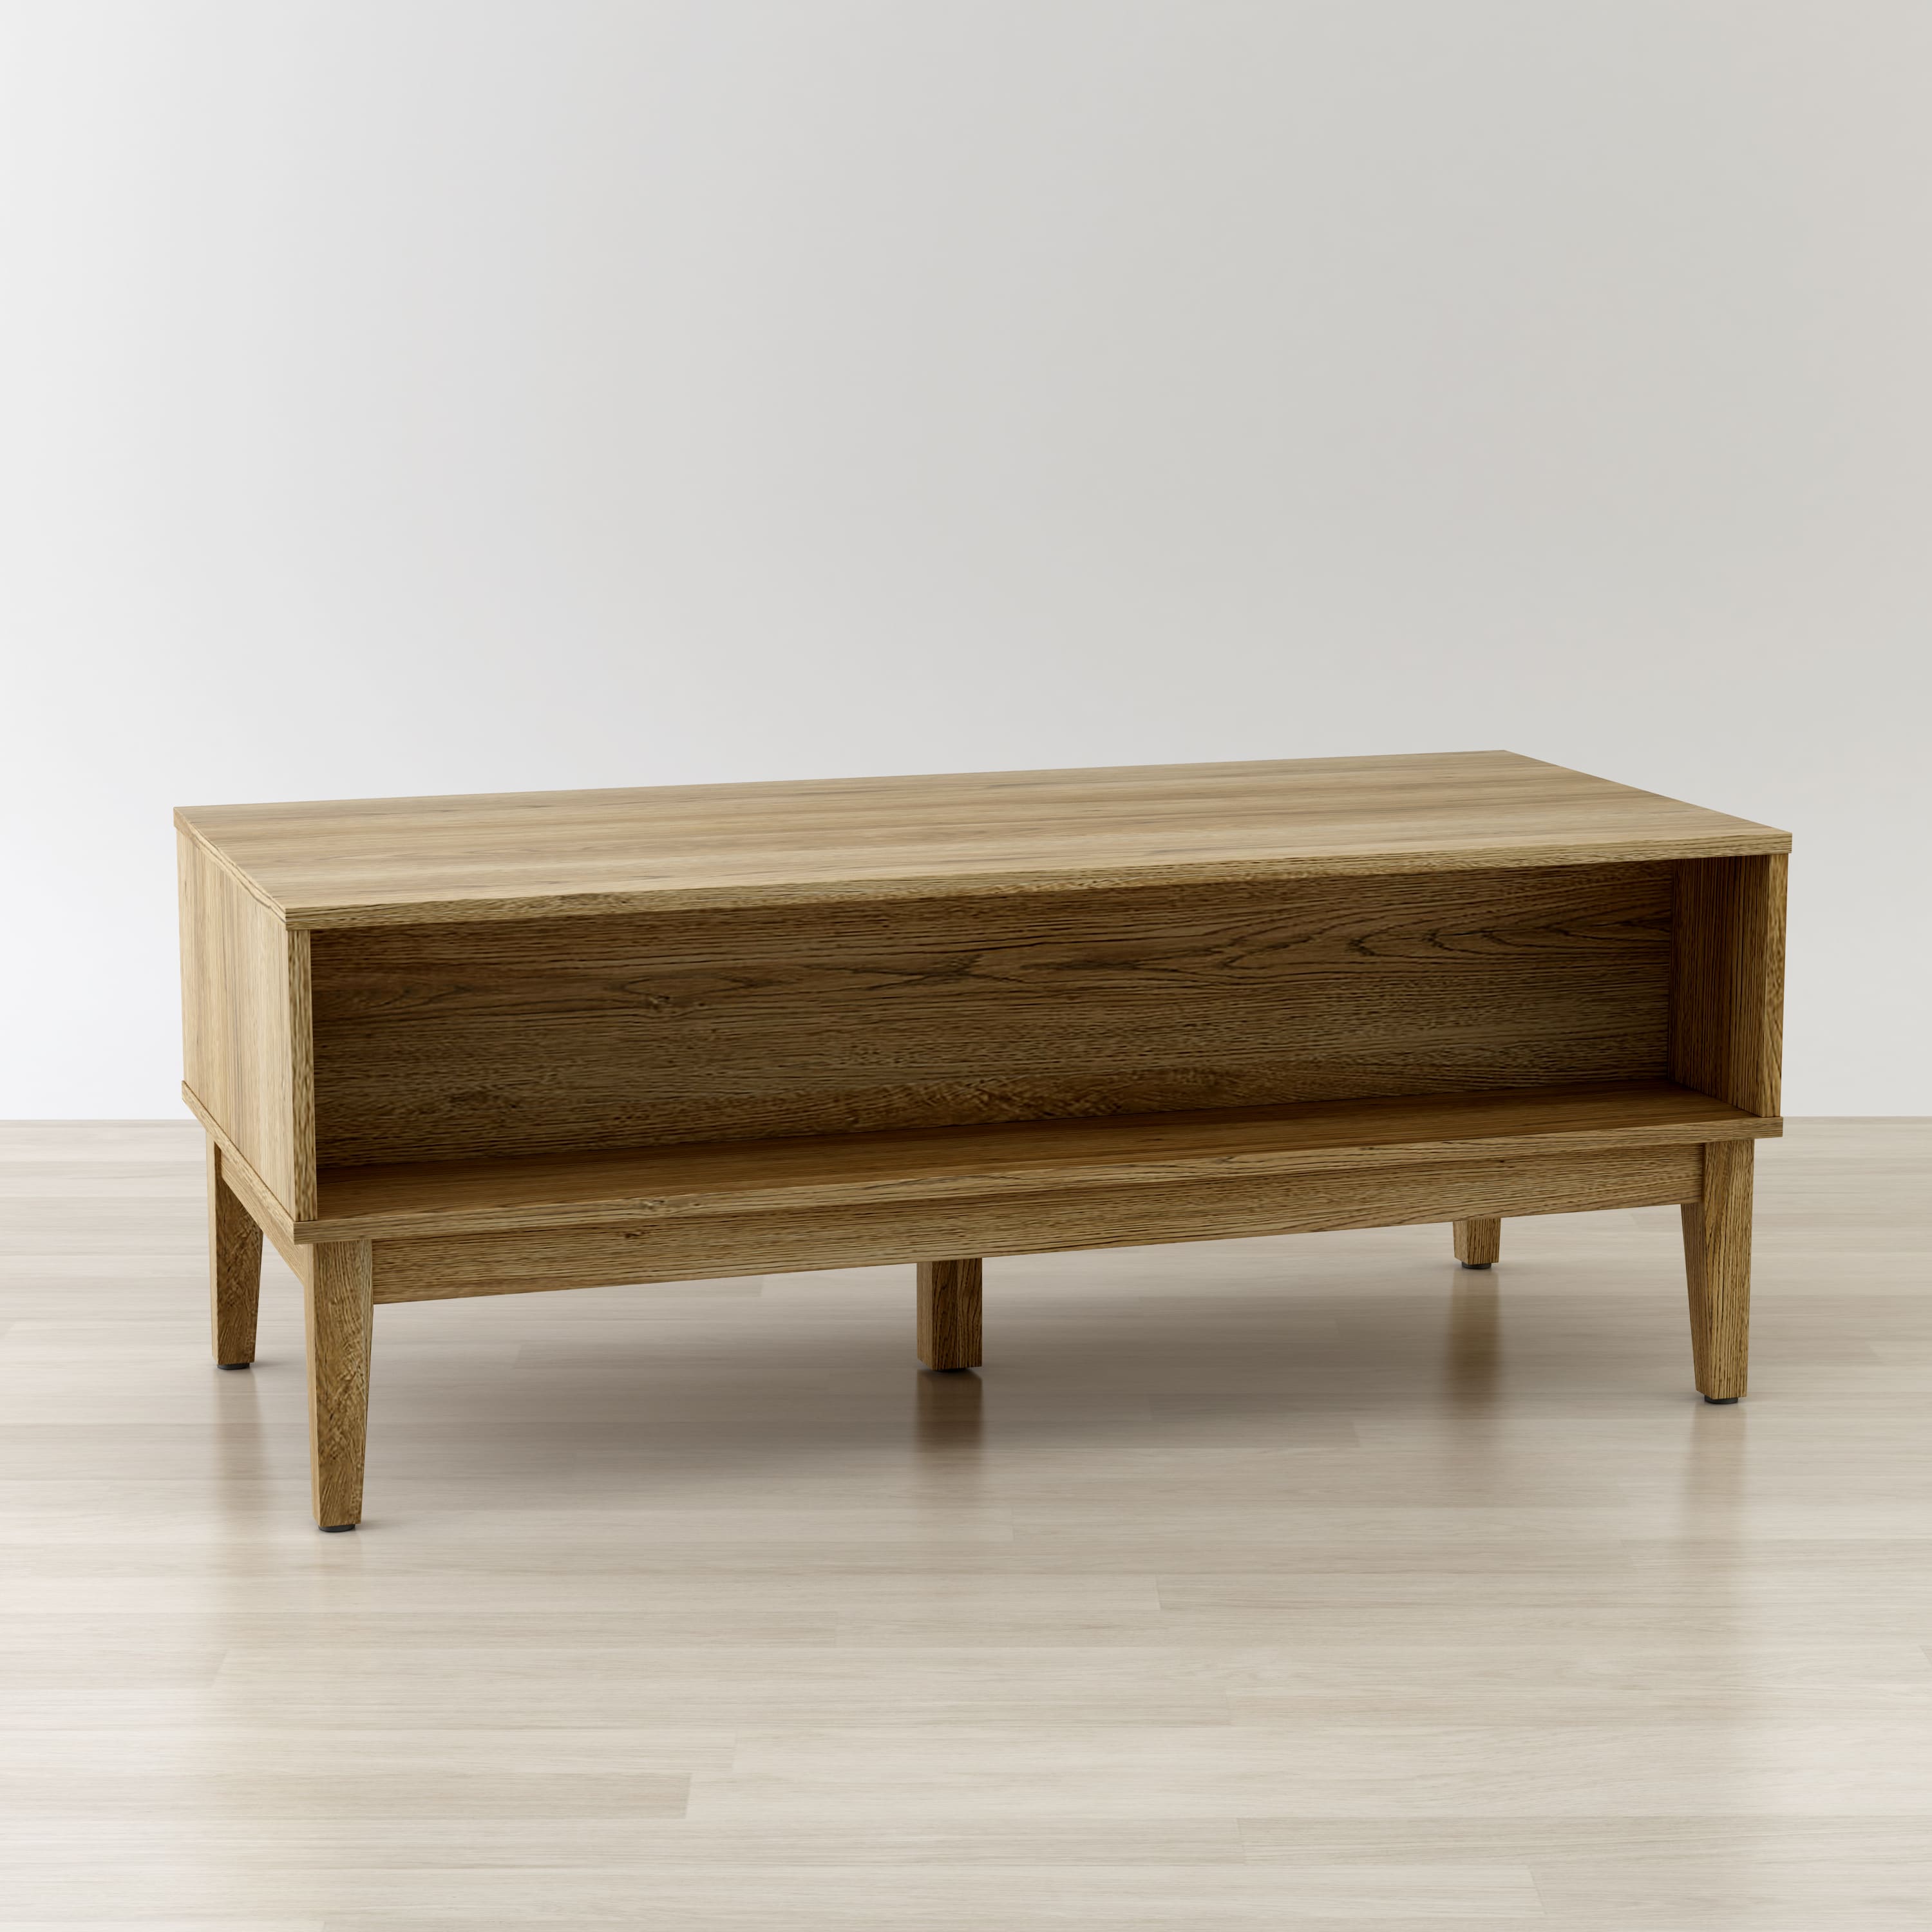 Anderson teak coffee table with storage - back view